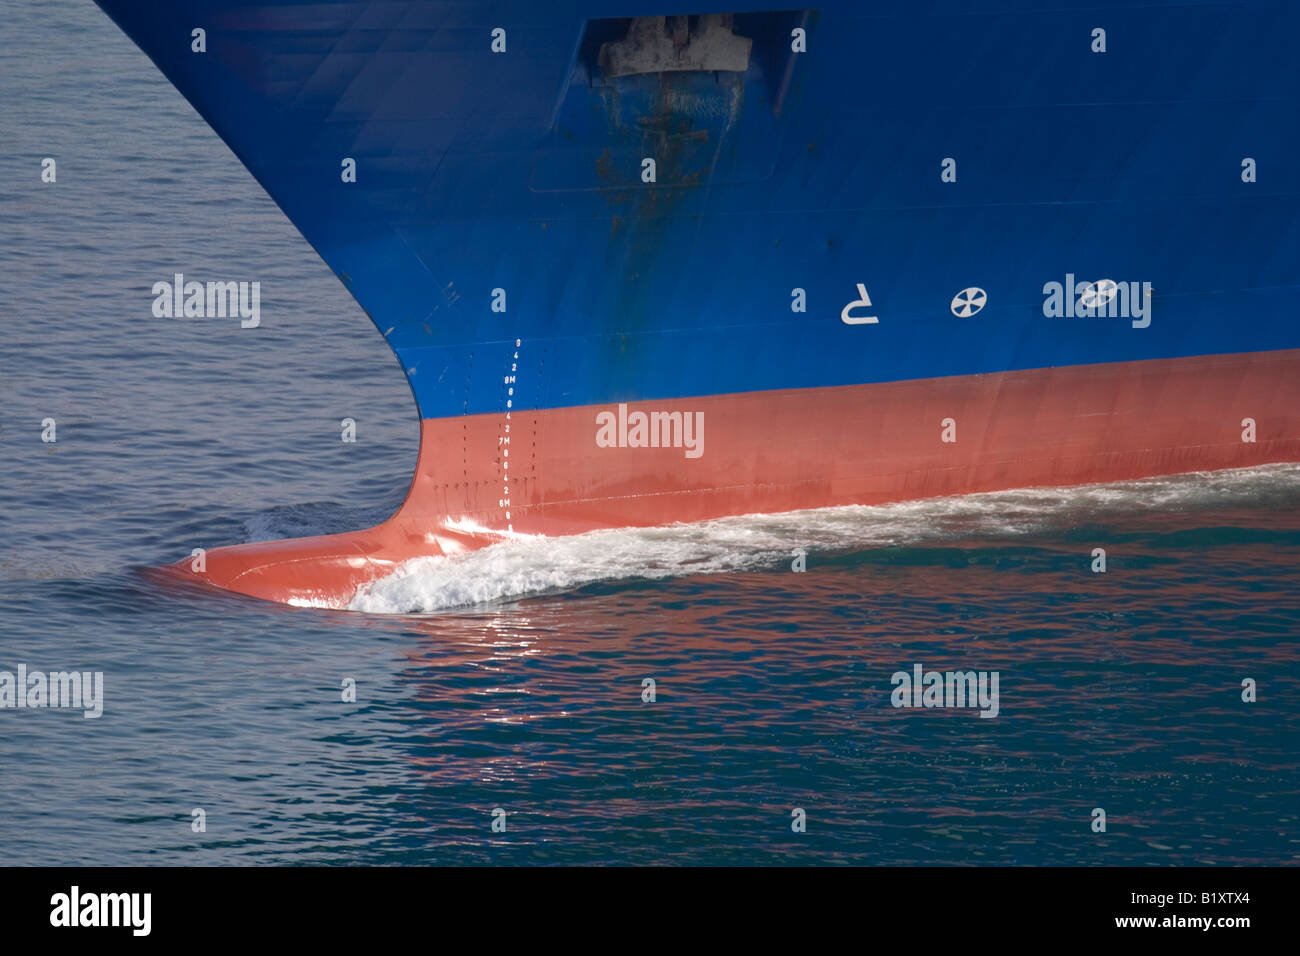 Ship's bow cutting through water Stock Photo